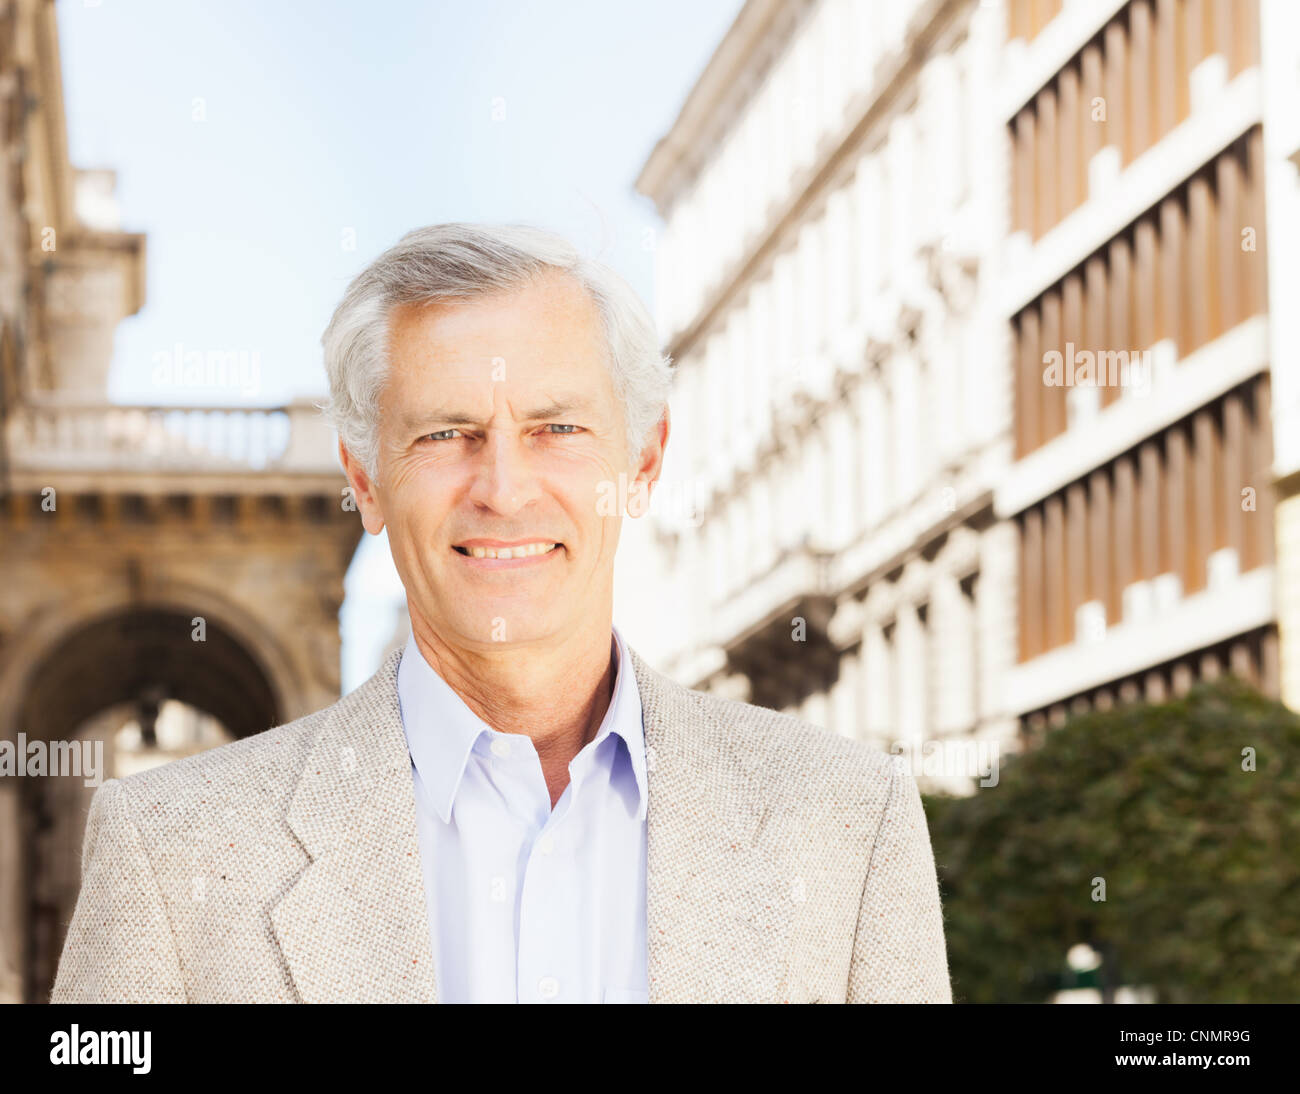 Close up of businessman’s smiling face Stock Photo